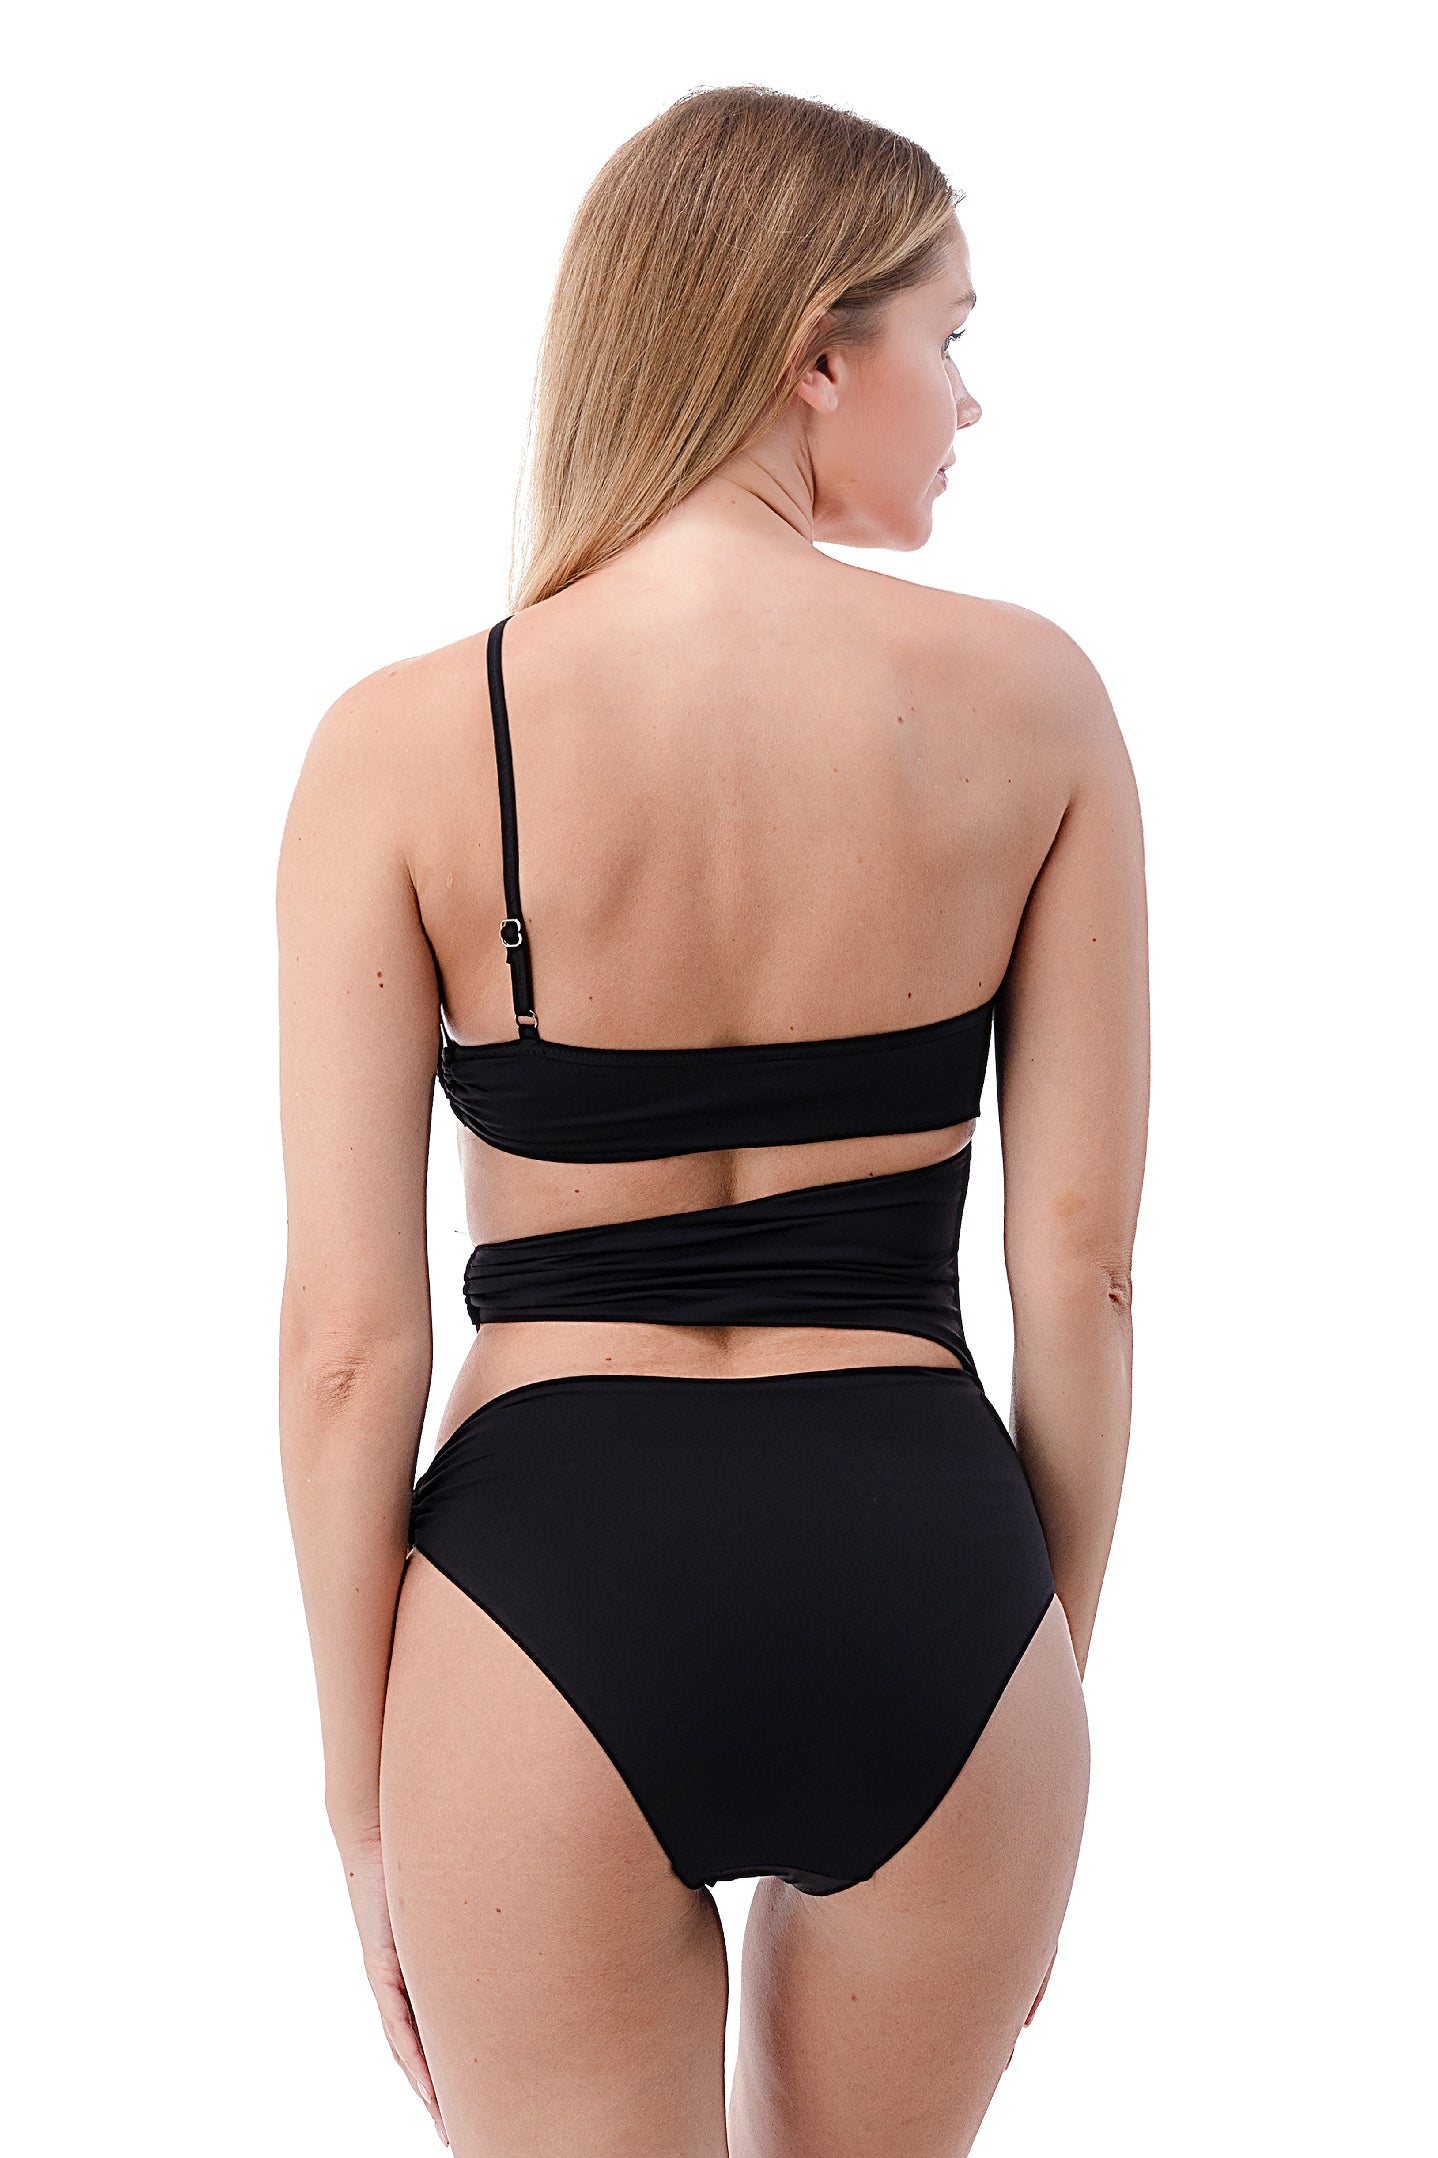 Carmelie Ring Side Asymmetric One-Piece | Cata Freer | Solid Black